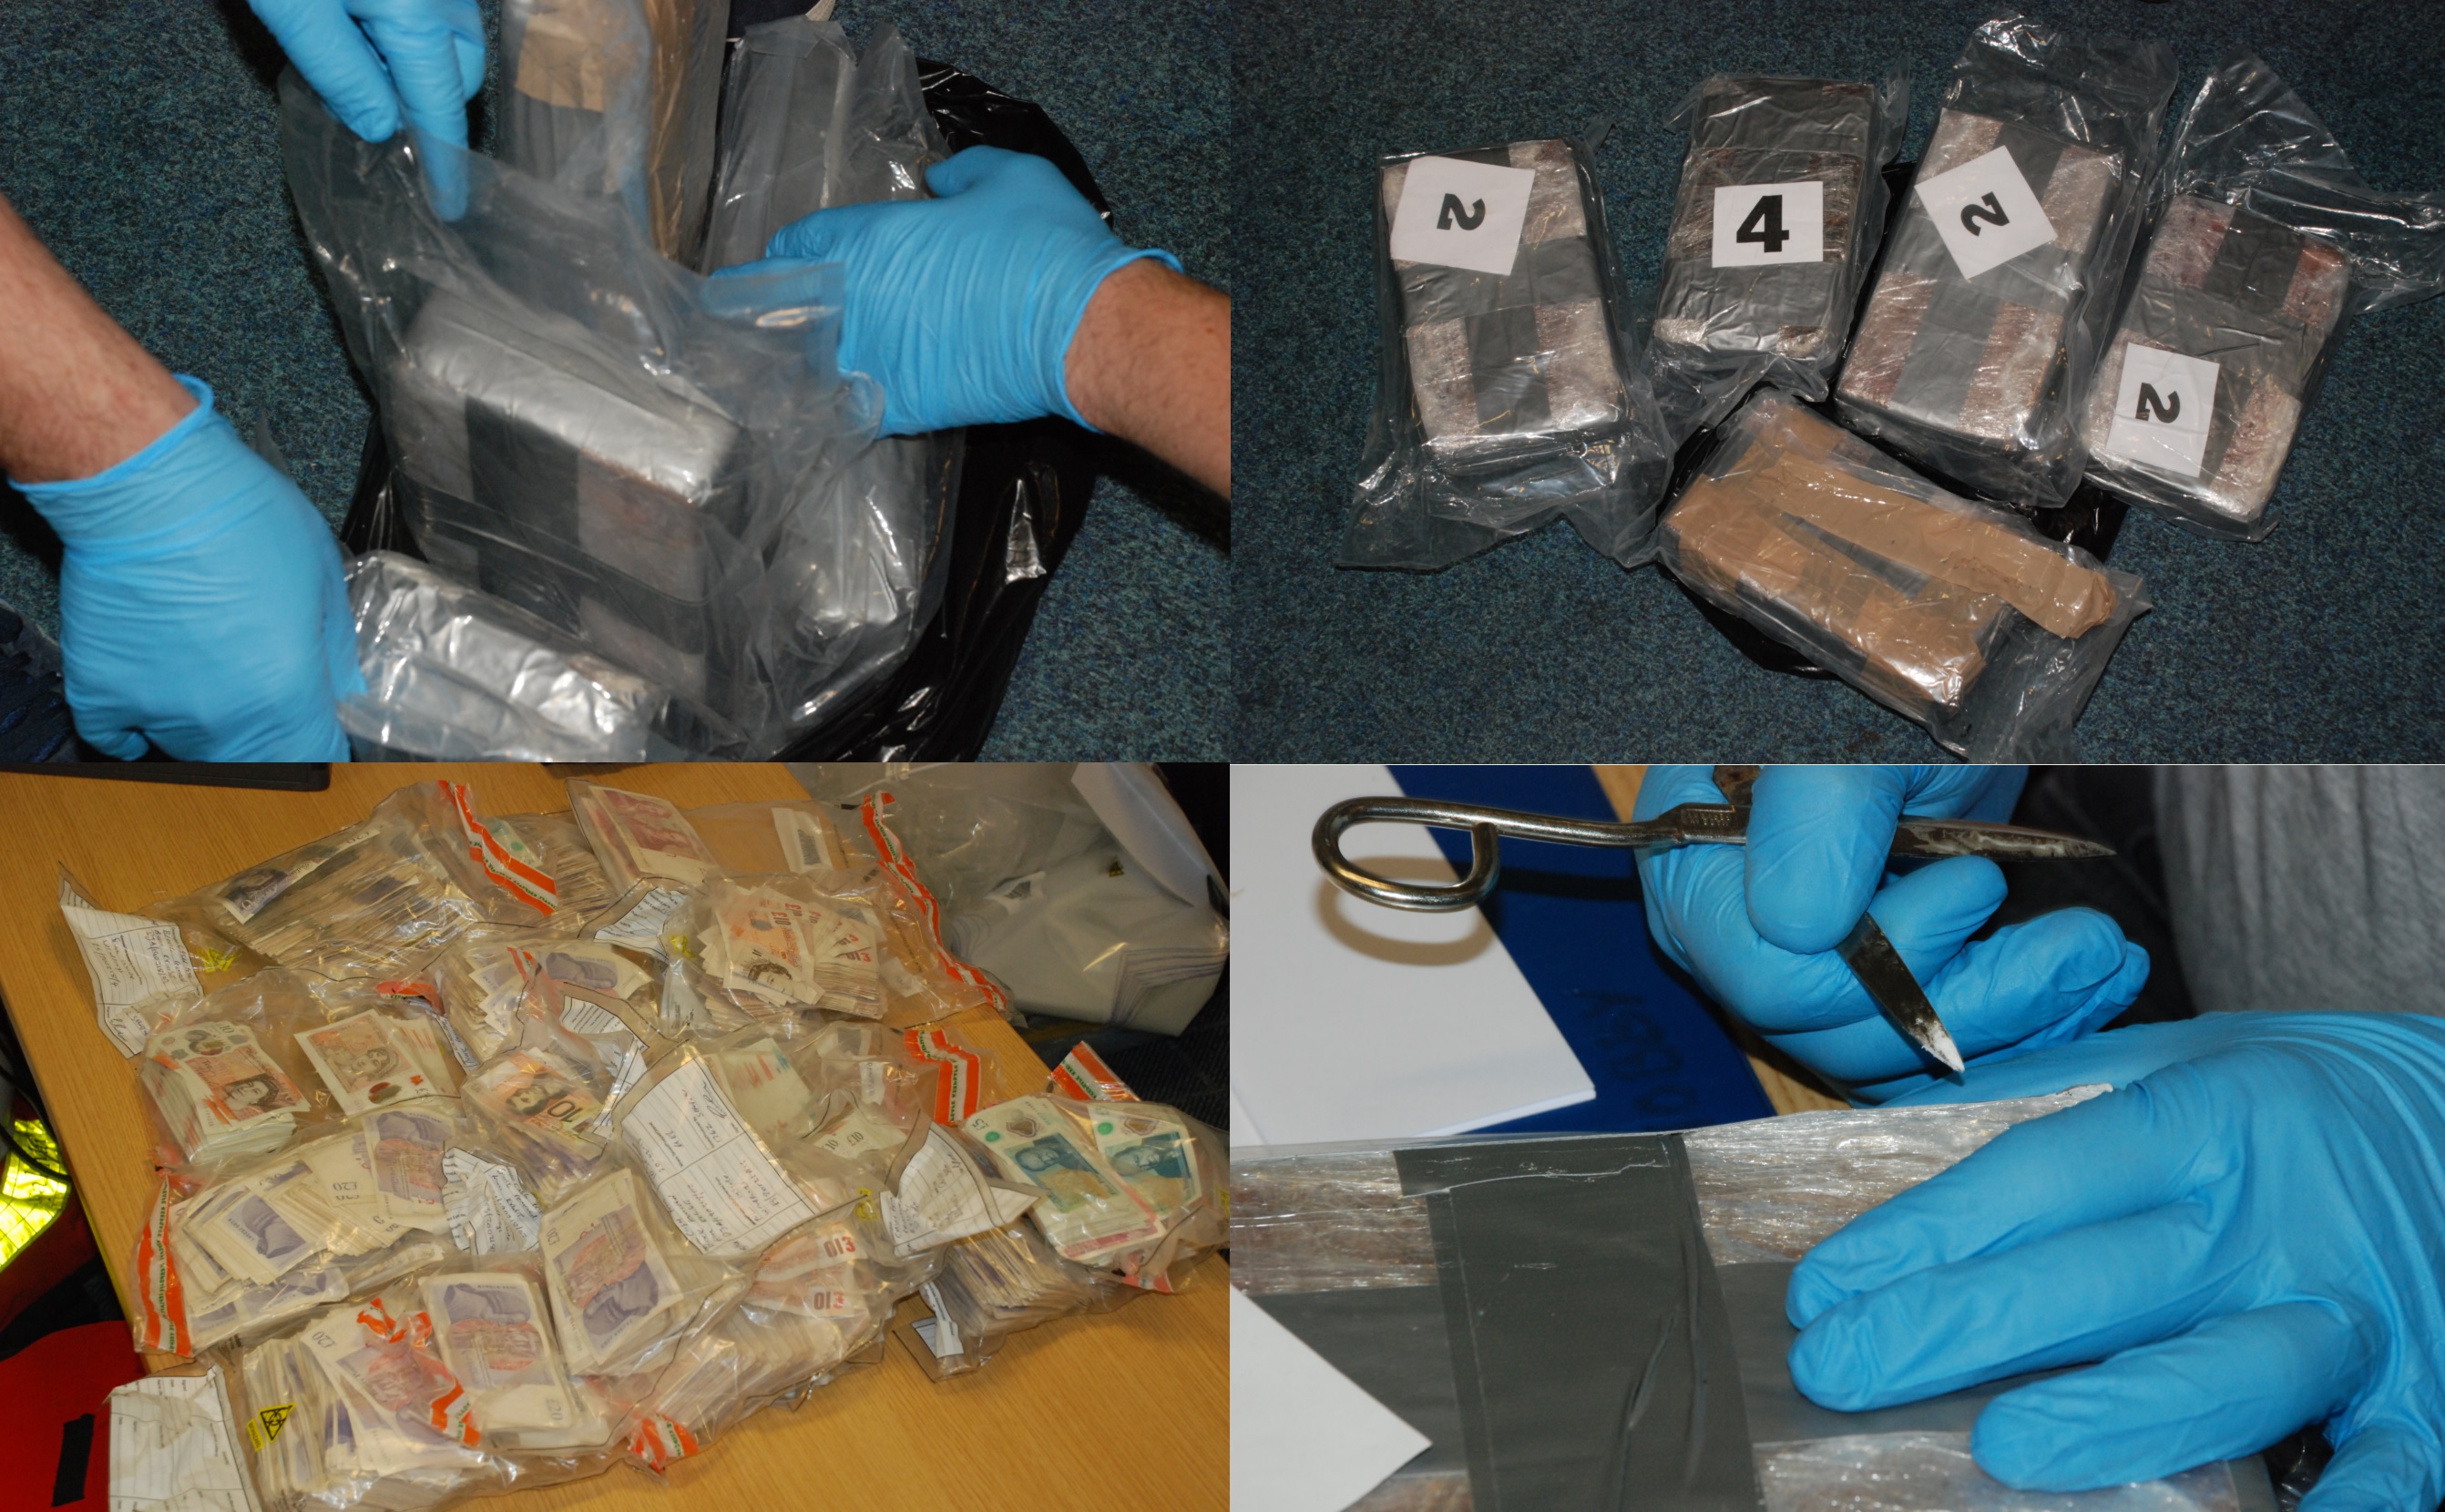 More information about "More than £750,000 in suspected Class A drugs and cash seized in raids"